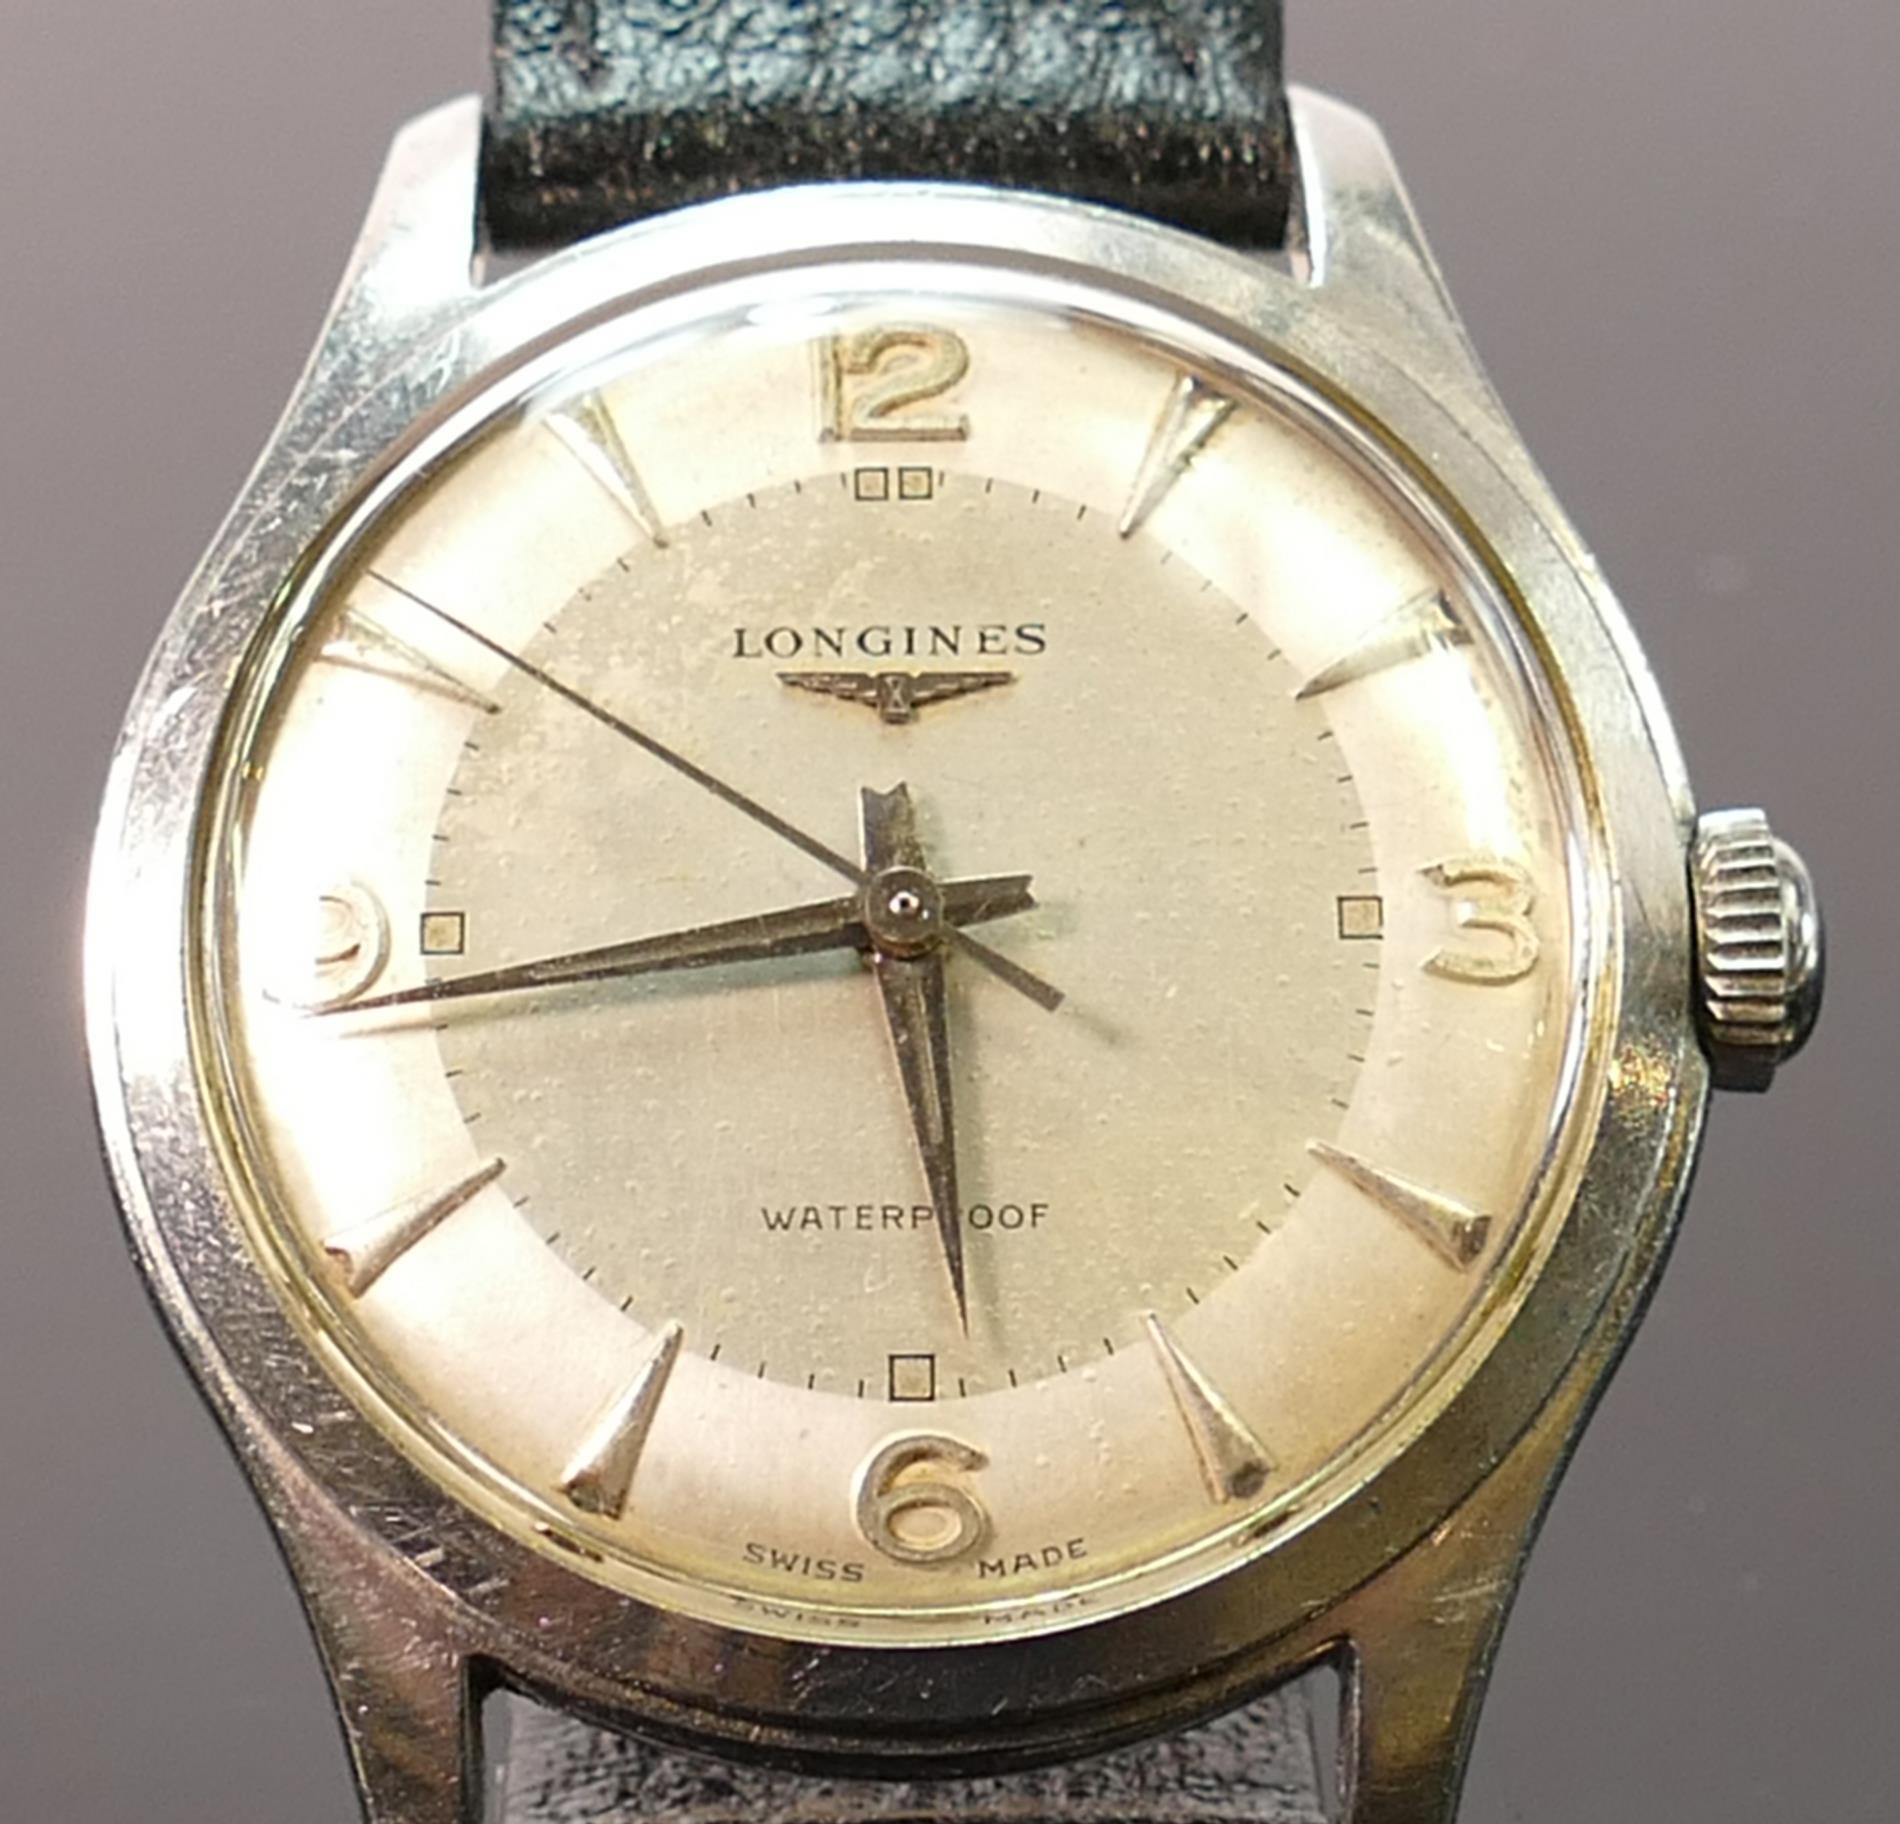 Longines stainless steel 1950s gents wristwatch: Pie pan style dial with leather bracelet. - Image 3 of 3